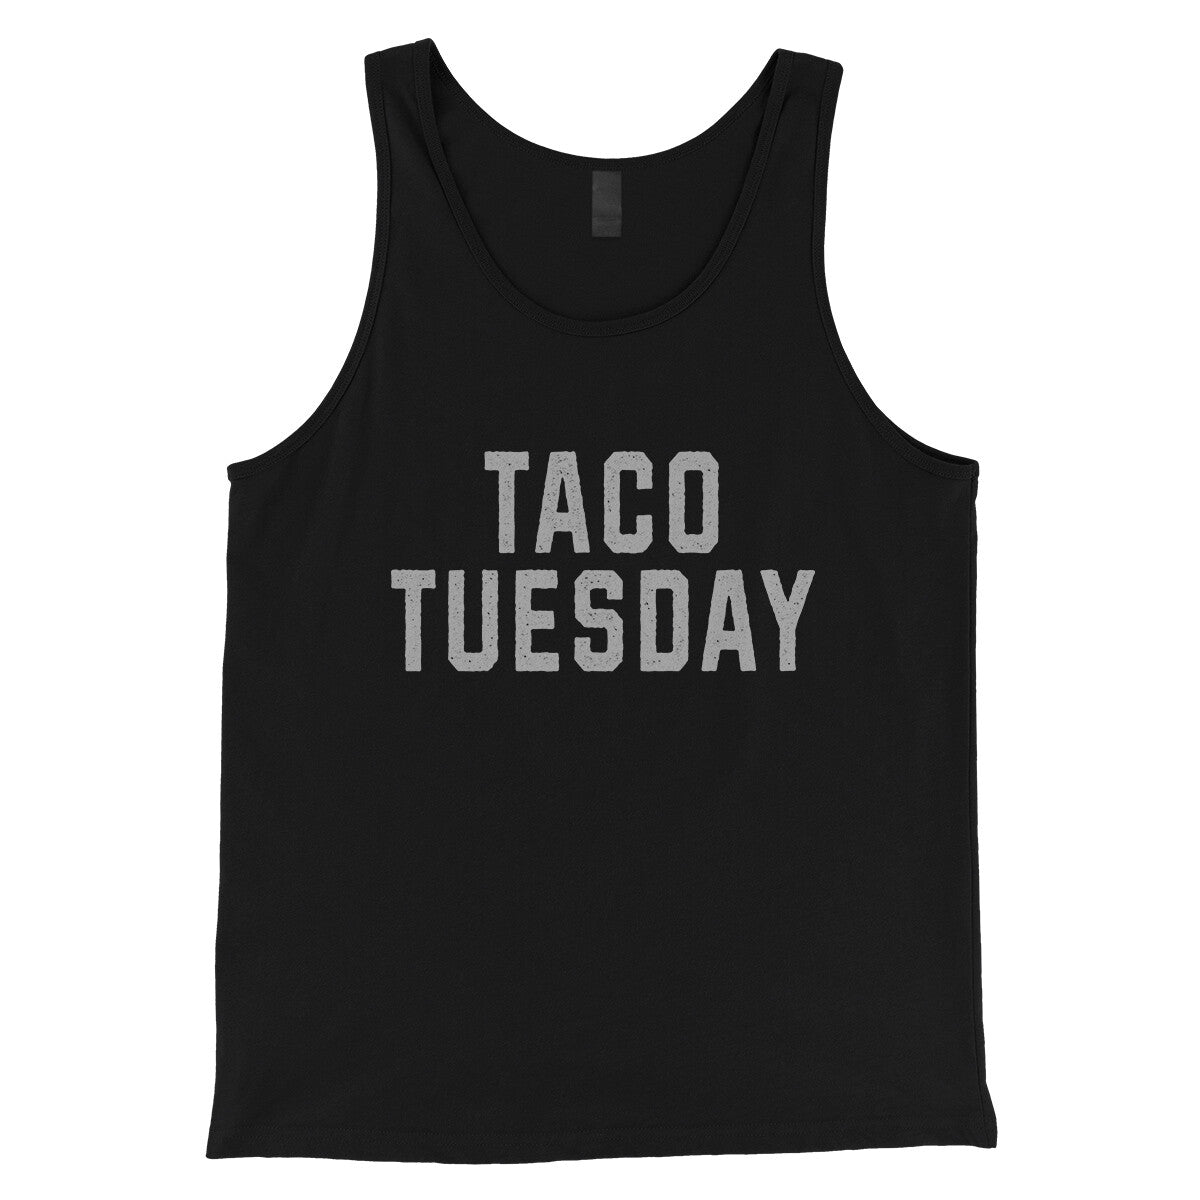 Taco Tuesday in Black Color